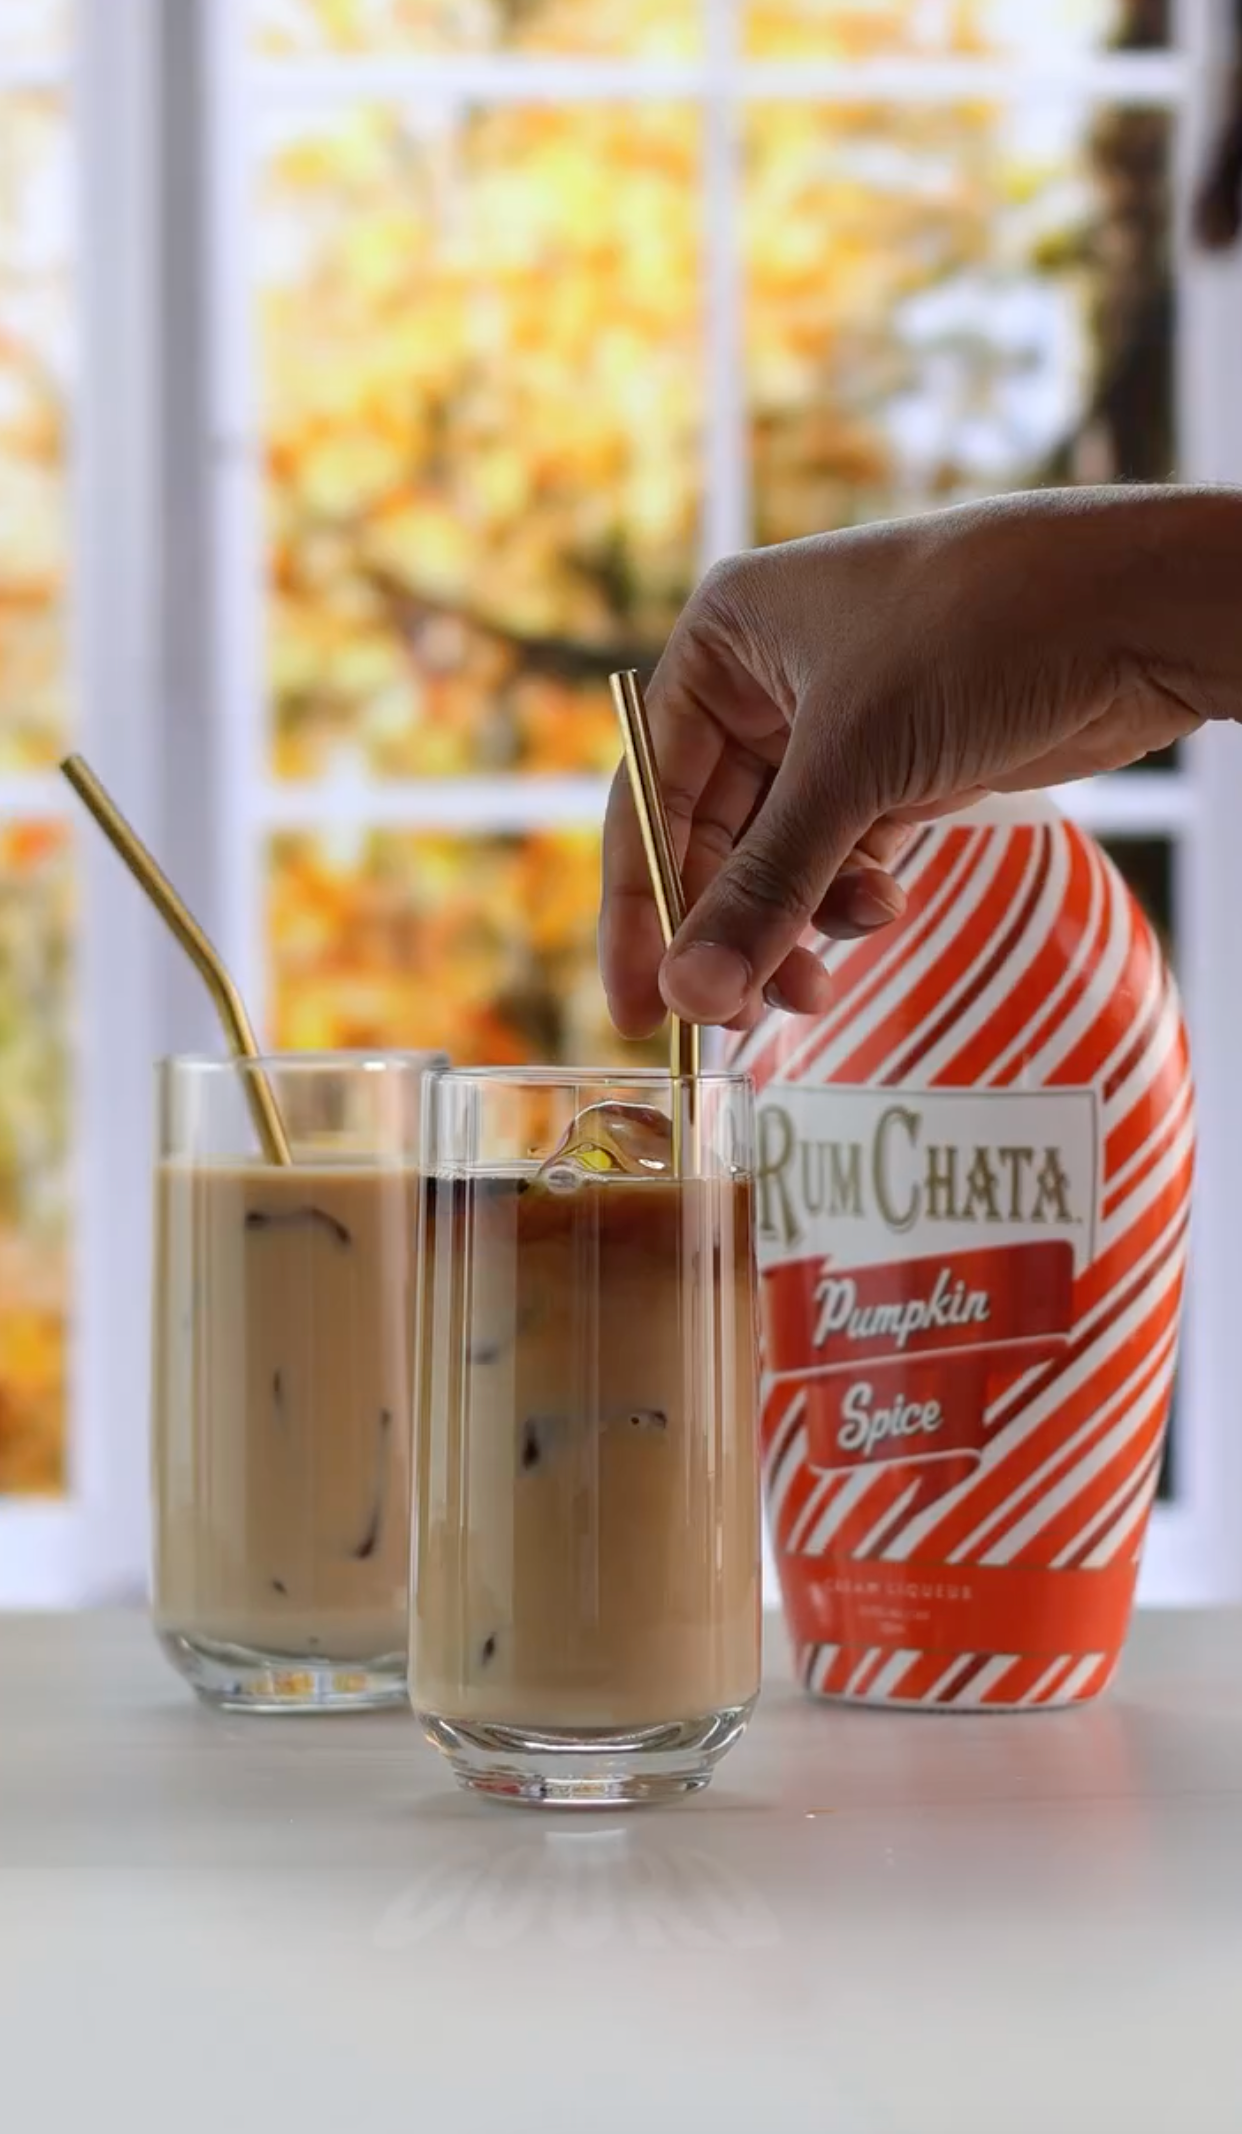 RumChata Pumpkin Spice (with real dairy cream)